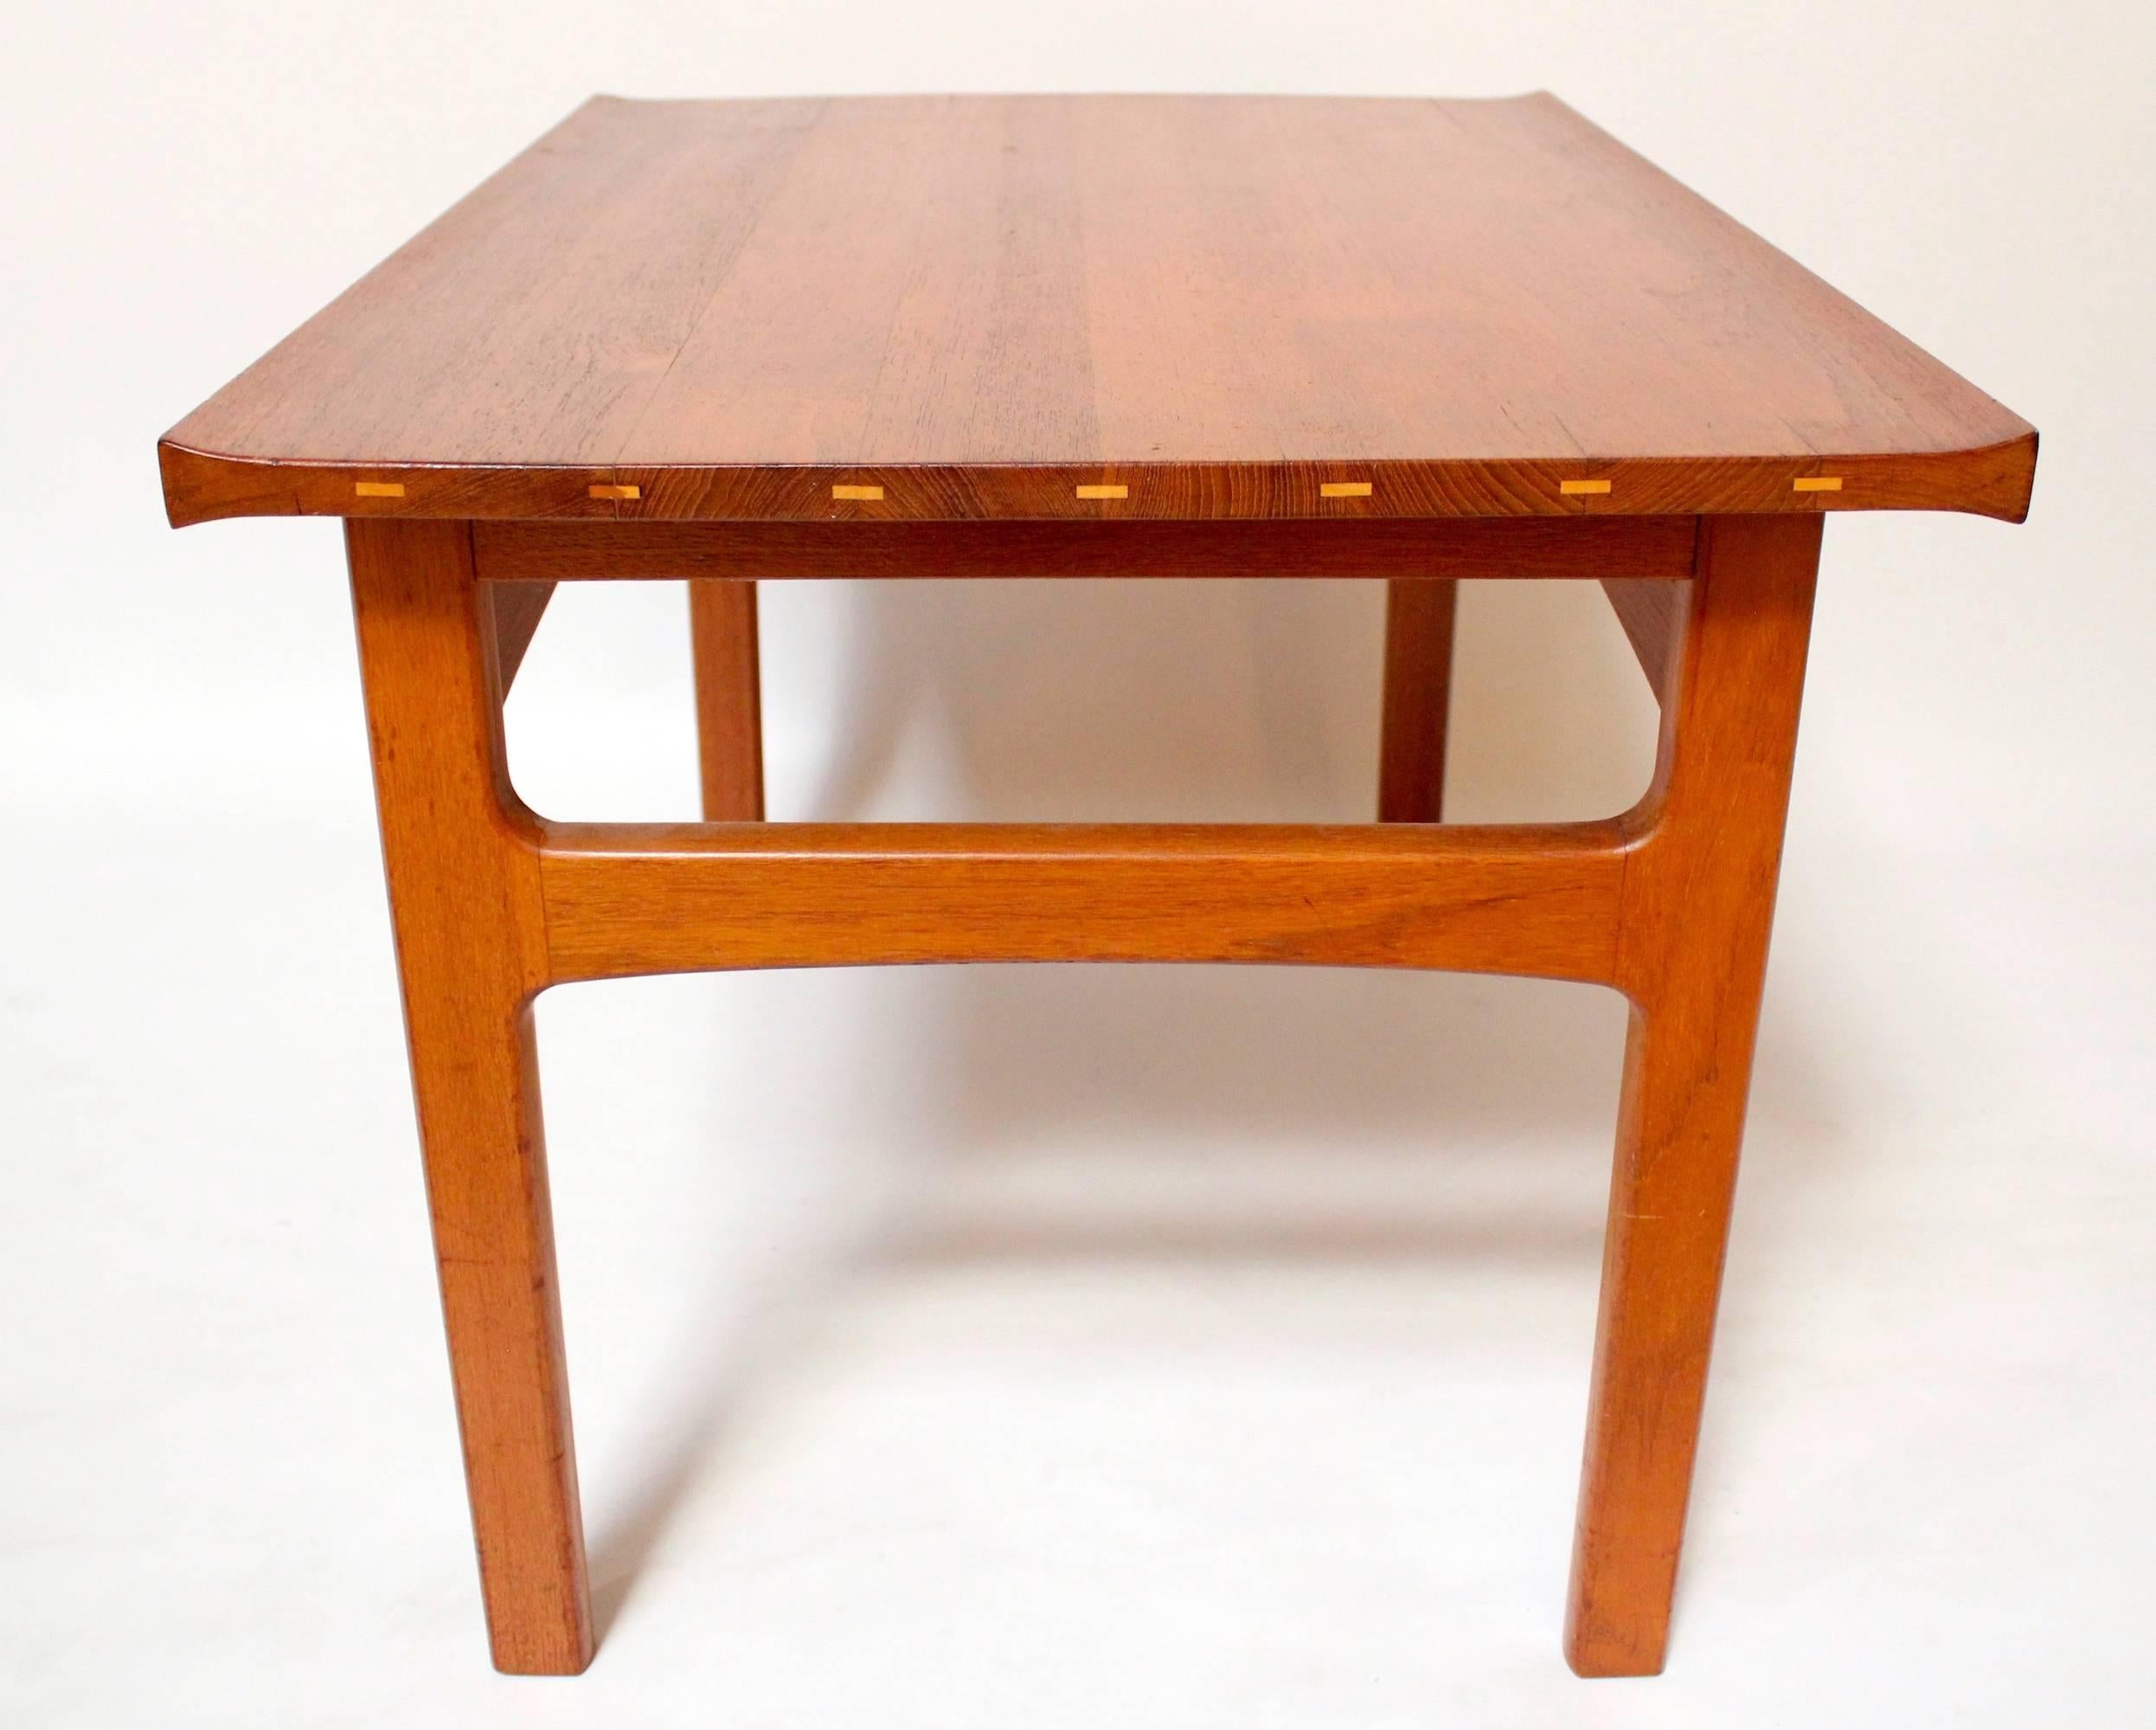 1960s Scandinavian Modern Solid Teak Side Table In Excellent Condition For Sale In Sacramento, CA